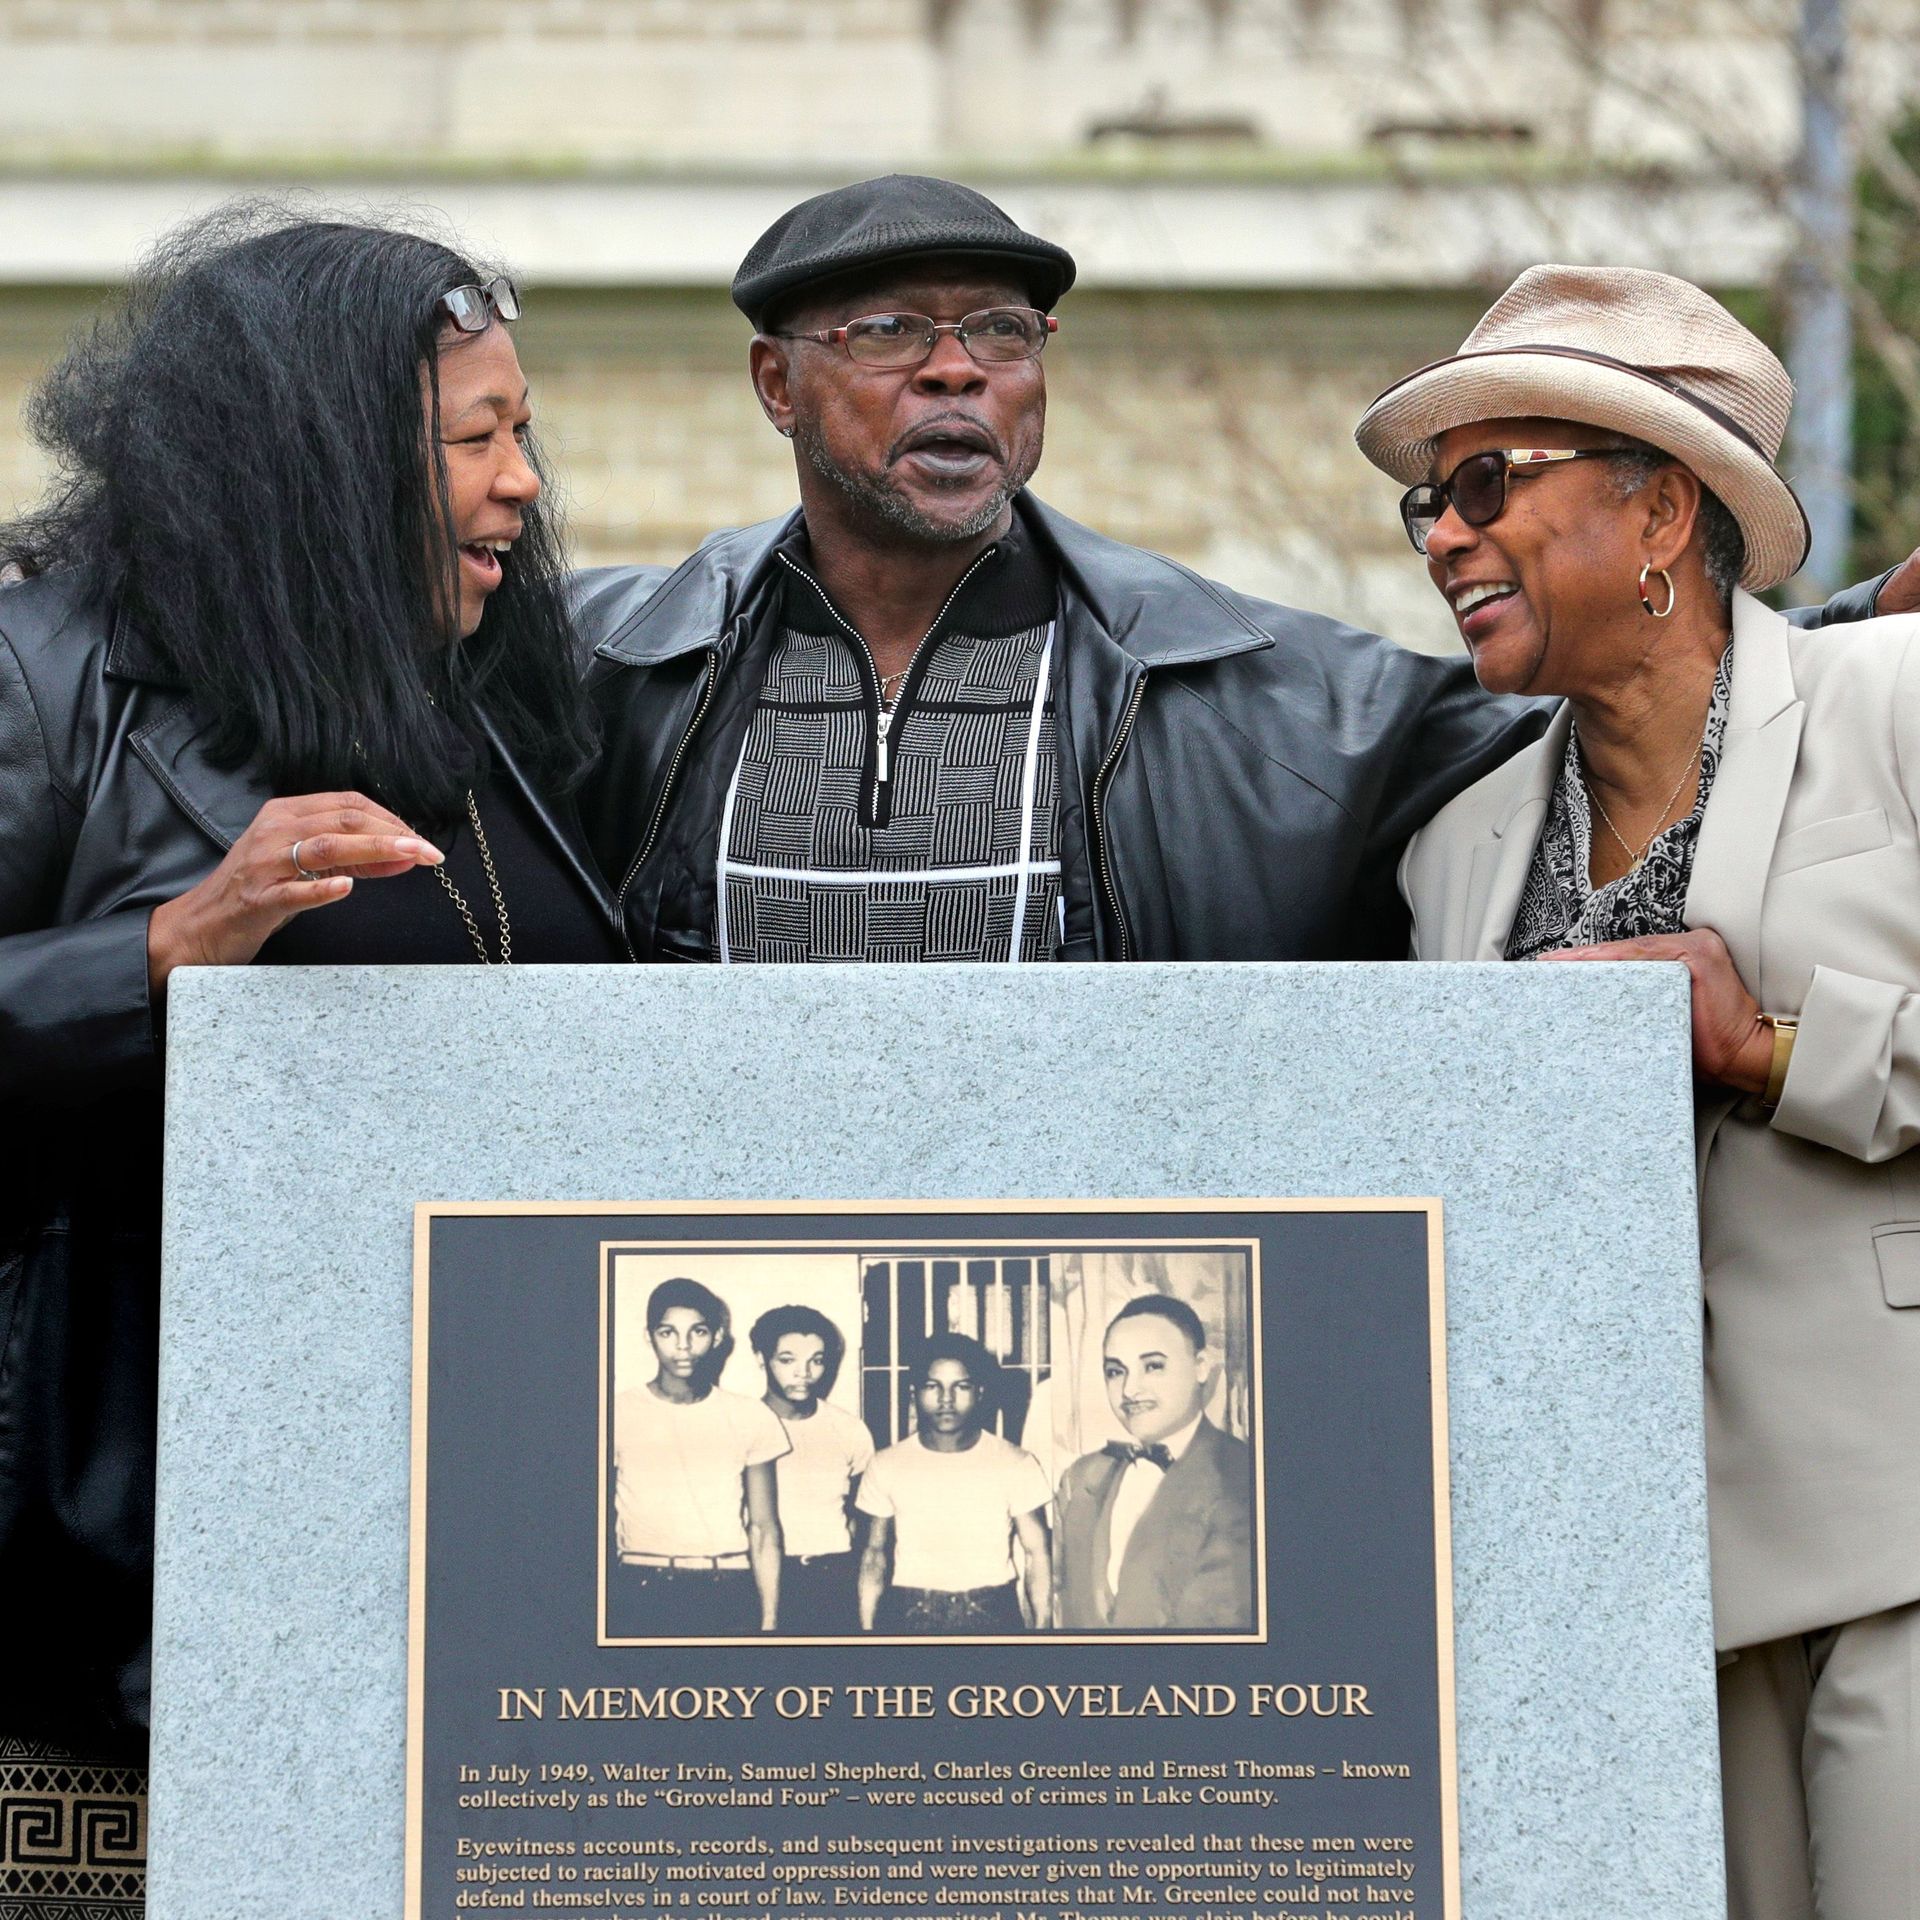 A man and two woman stand behind a granite monument with a plaque that reads "In Memory of the Groveland Four" under an image of four young men.  